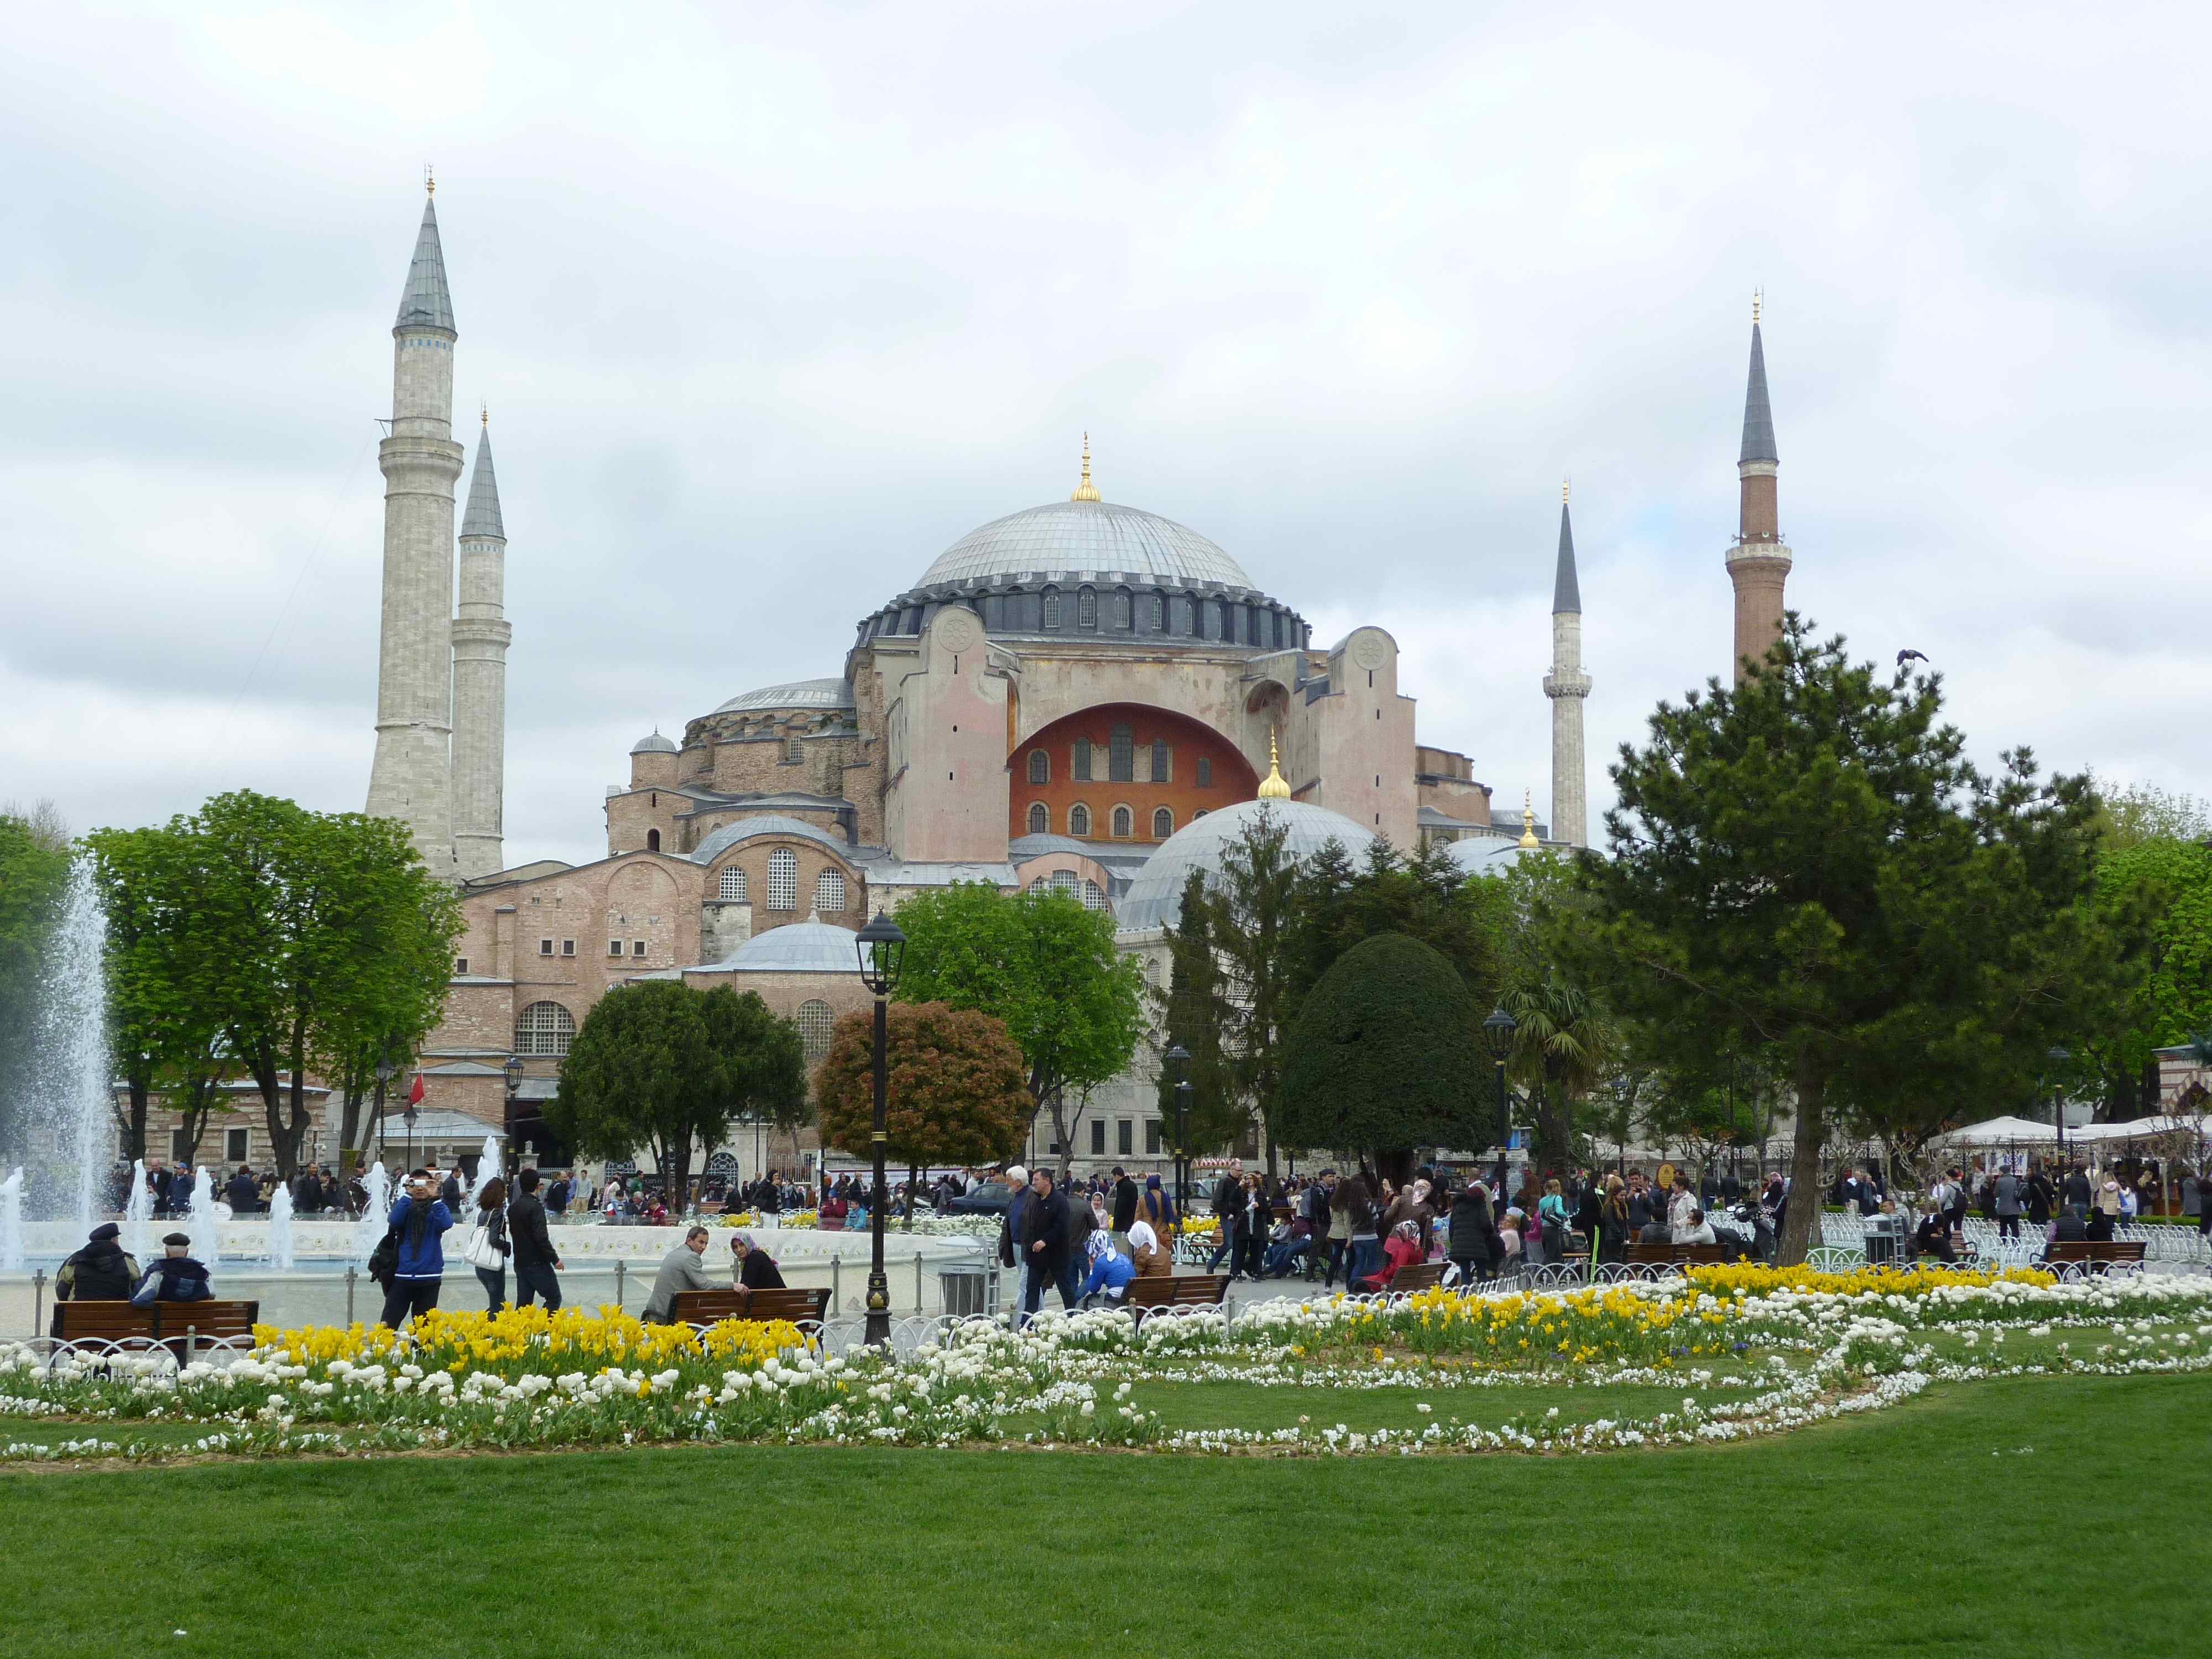 Aya Sophia. First a church, then a mosque and now a museum